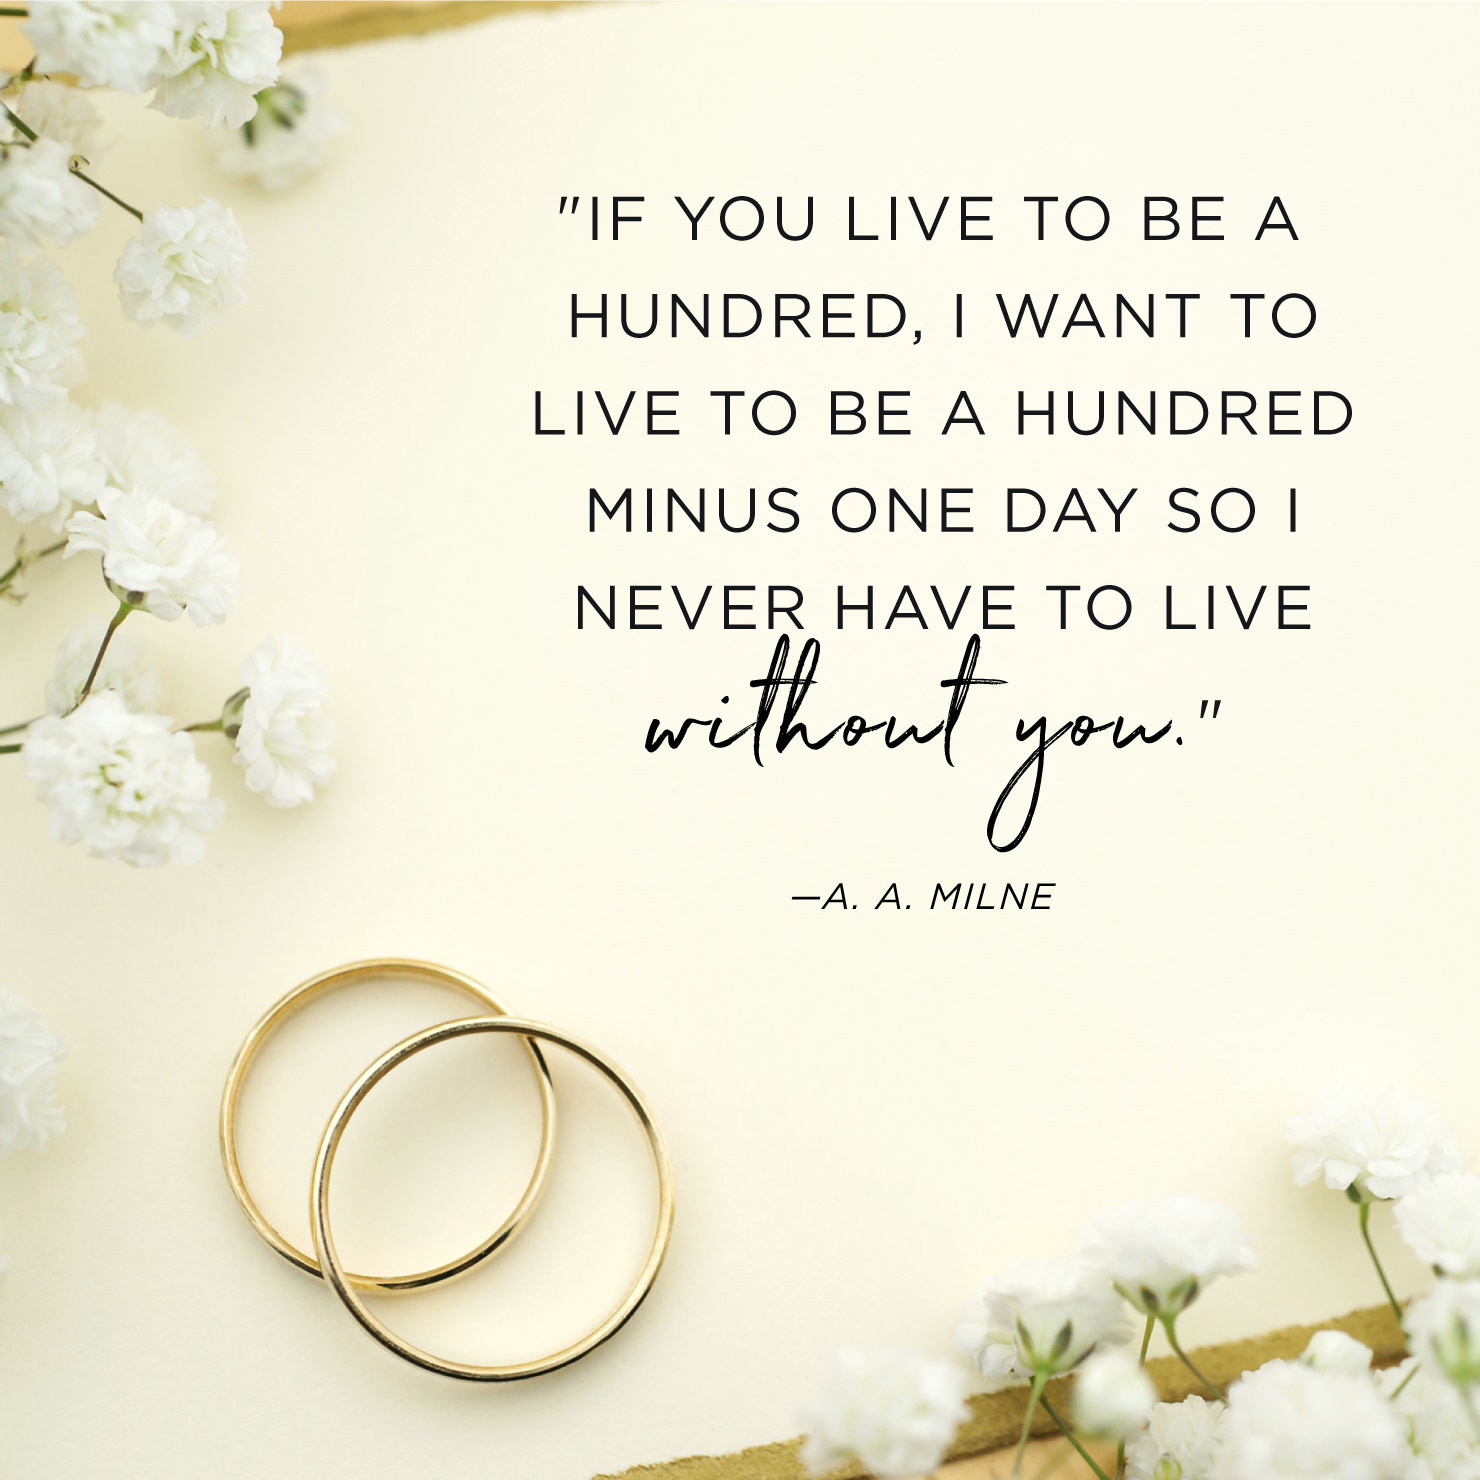 Best Wedding Anniversary Quotes
 60 Happy Anniversary Quotes to Celebrate Your Love